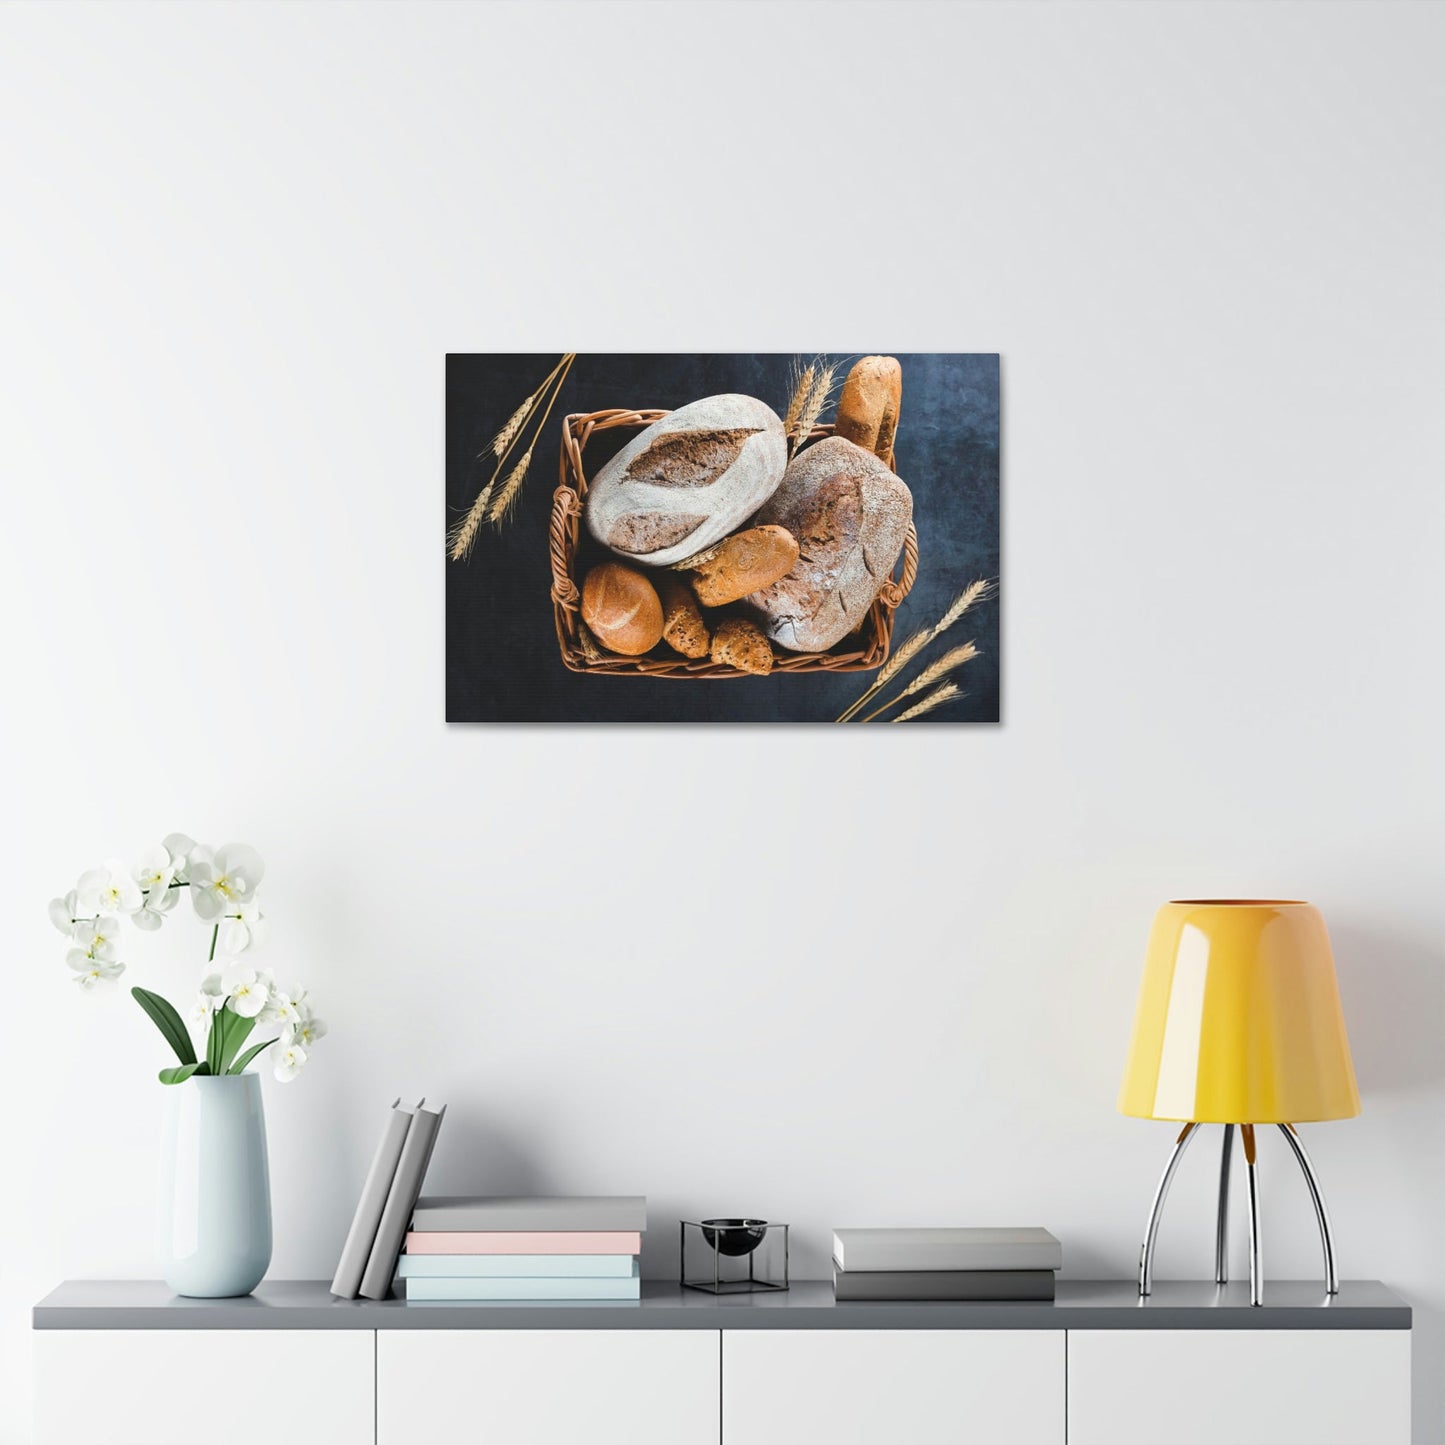 Rustic Bakery Delight: Natural Canvas and Poster with Freshly Baked Bread Art